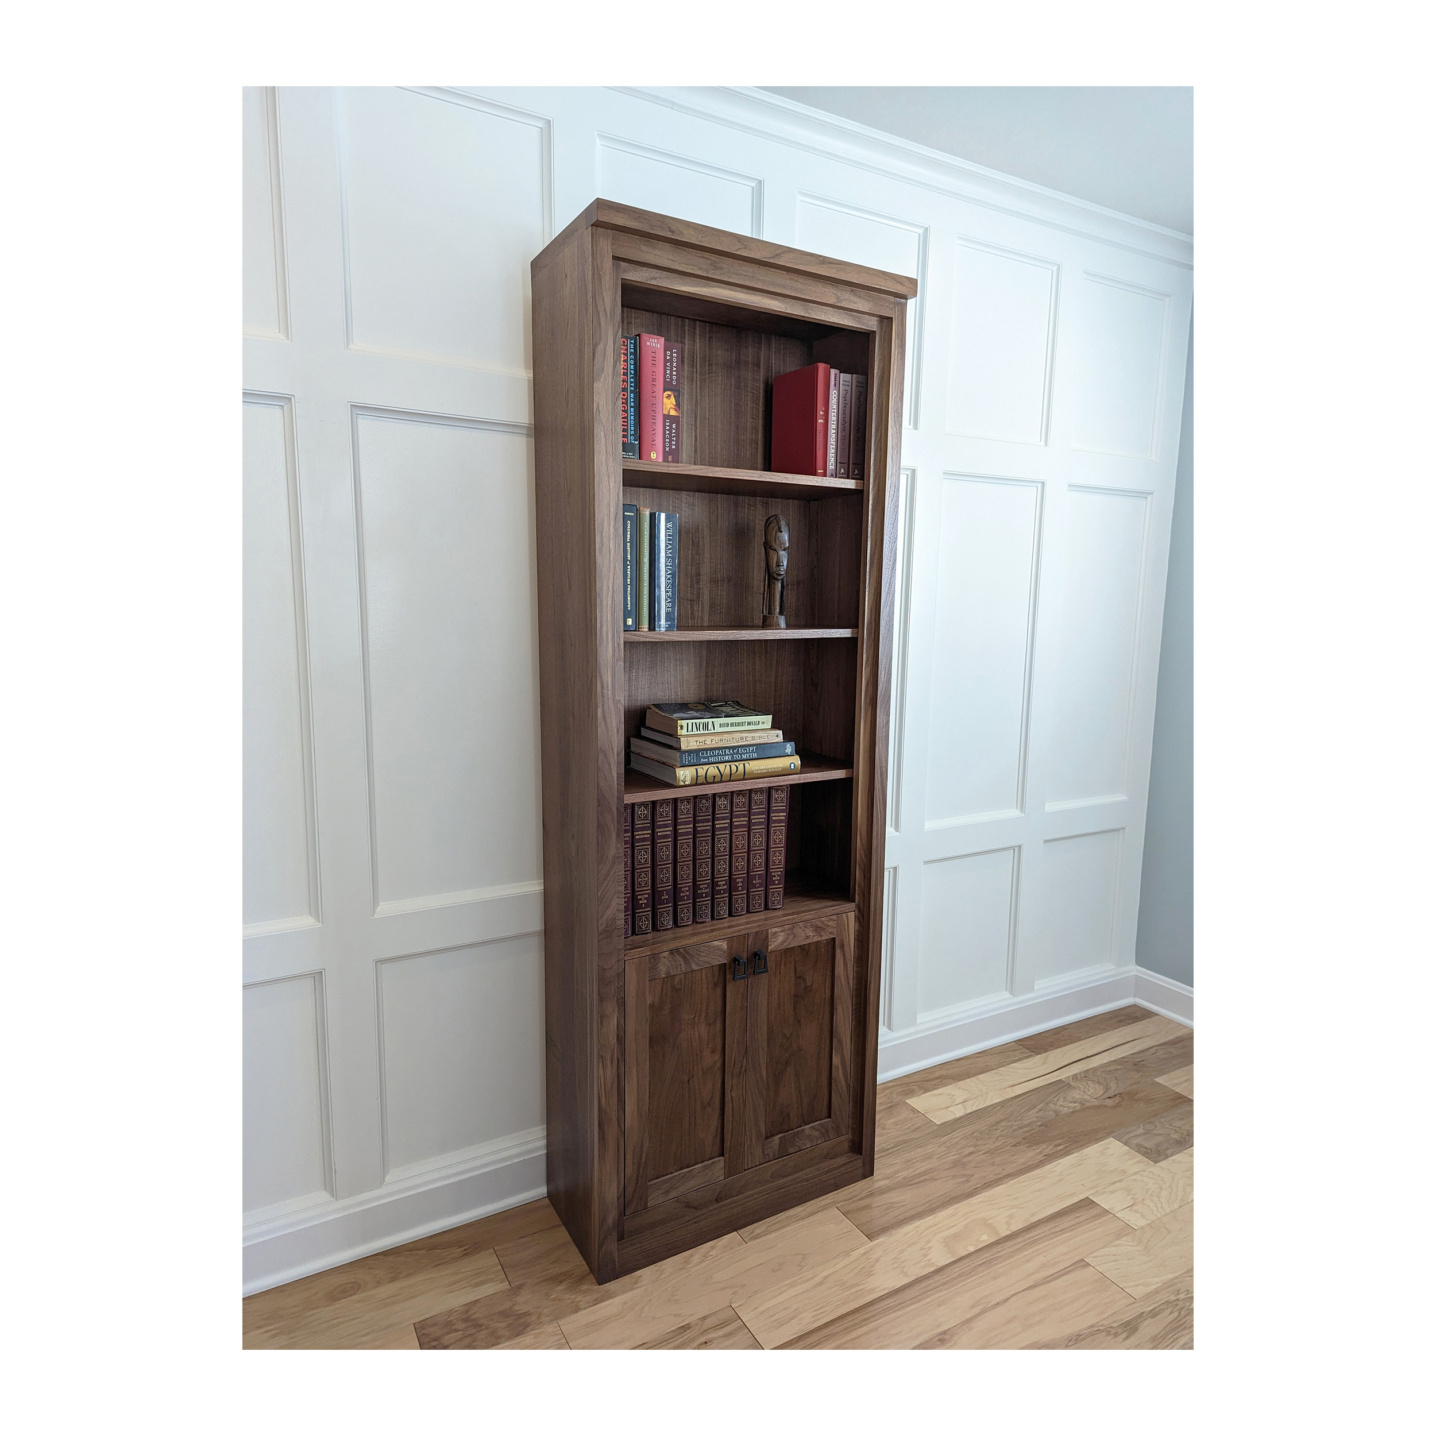 Fine furniture bookcase with doors constructed in solid walnut wood----Made by 57NorthPlank Tailored Modern Furniture